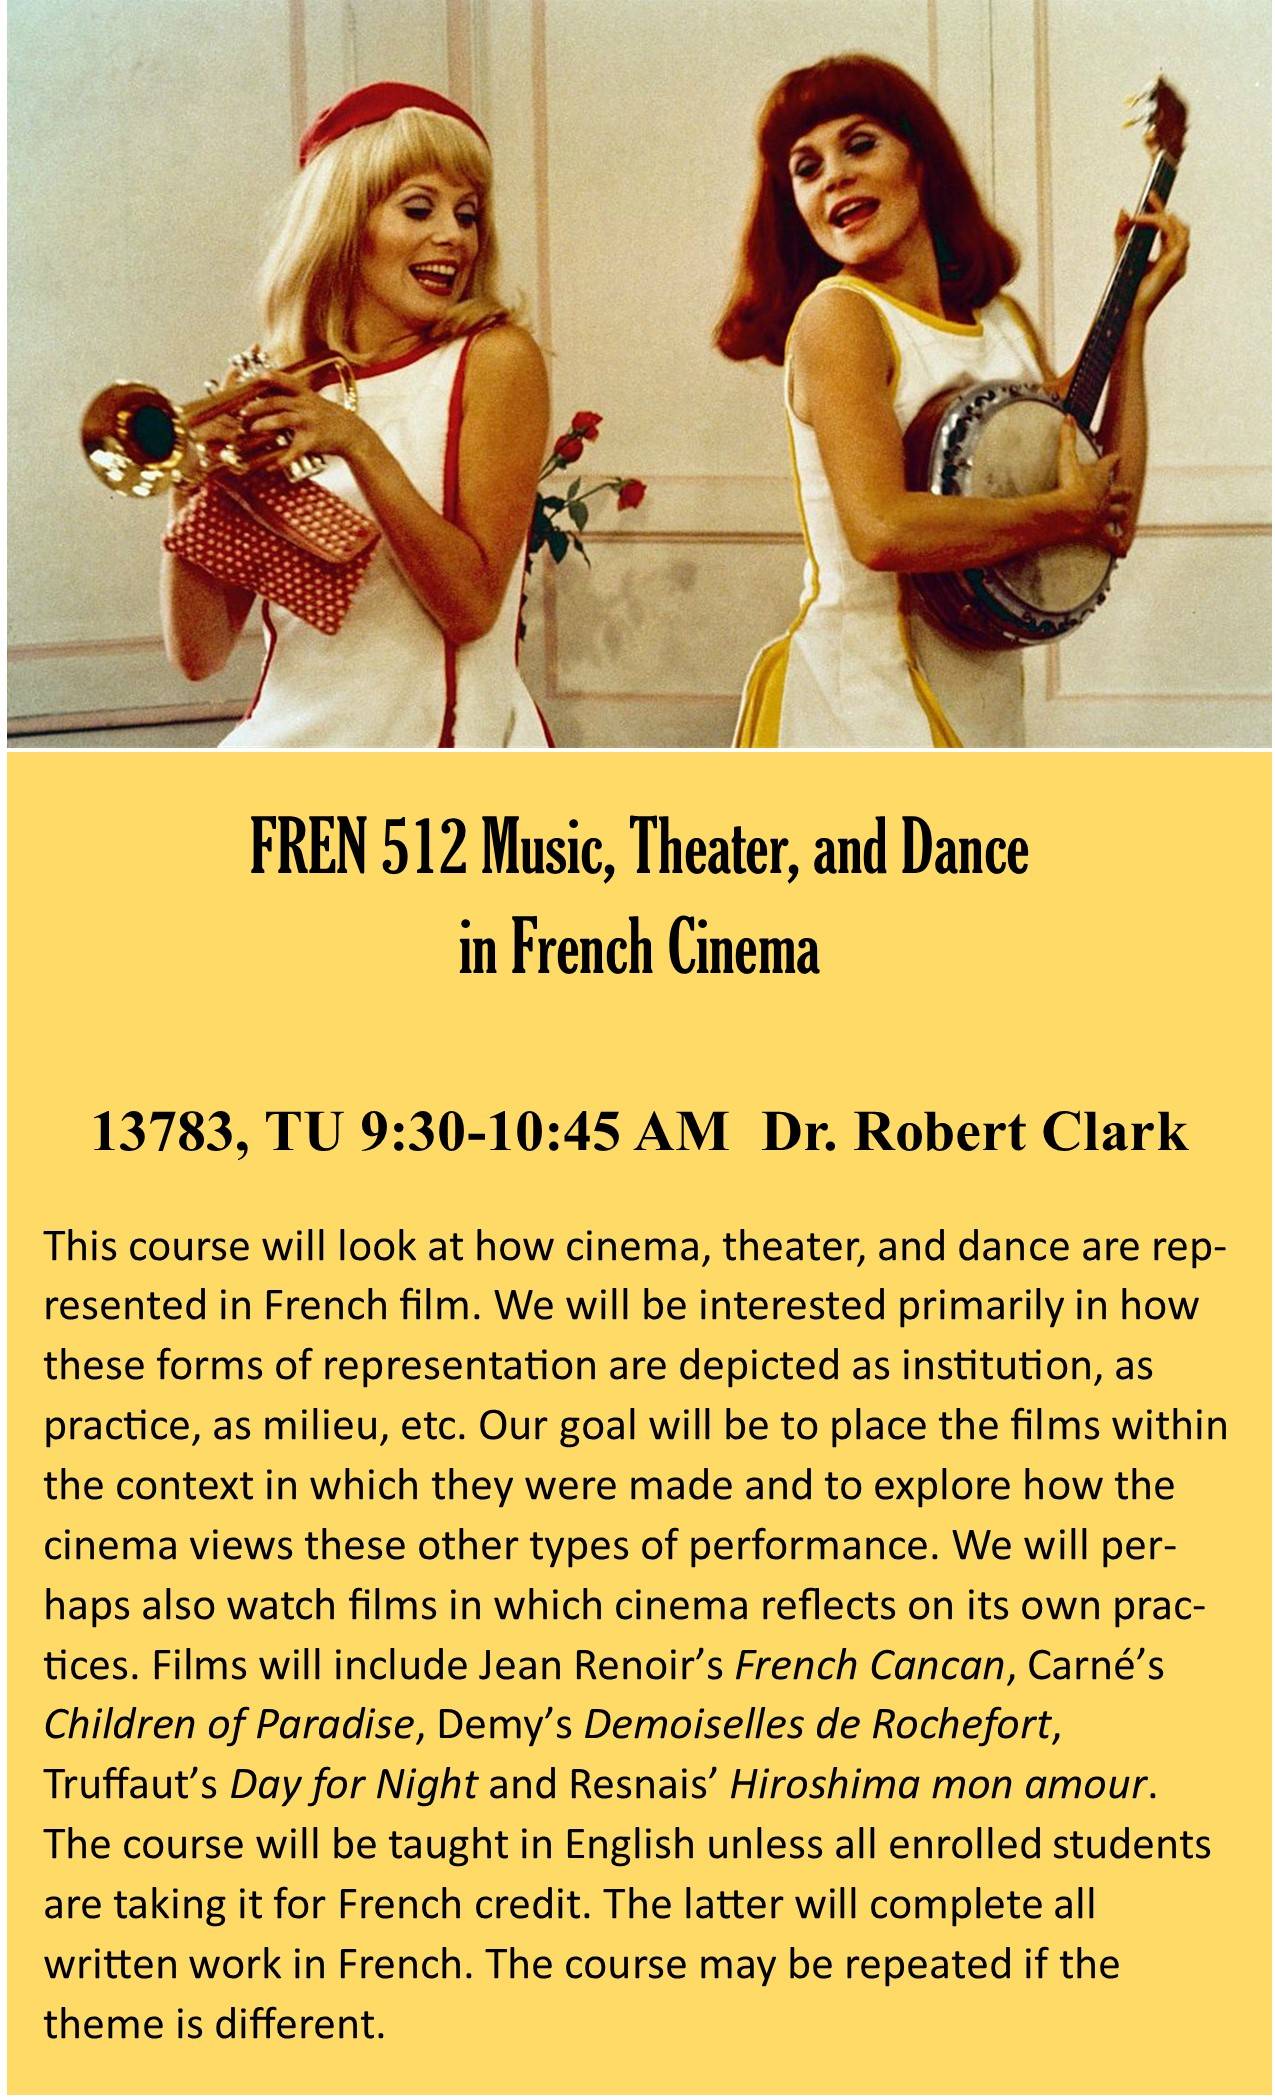 FREN 512: Music, Theater and Dance in French Cinema, Dr. Robert Clark (rclark@ksu.edu) (A: 13783) (TU 9:30-10:45 PM, EH 001. FREN 512): Film and Stage in the French Cinema, Dr. Robert Clark (rclark@ksu.edu) (A: 15724, TU 11:30-12:45, EH 001A). This course will look at how cinema, theater, and dance are represented in French film. We will be interested primarily in how these forms of representation are depicted as institution, as practice, as milieu, etc. Our goal will be to place the films within the context in which they were made and to explore how the cinema views these other types of performance. We will perhaps also watch films in which cinema reflects on its own practices. Films will include Jean Renoir’s French Cancan, Carné’s Children of Paradise, Demy’s Demoiselles de Rochefort, Truffaut’s Day for Night and Resnais’ Hiroshima mon amour. The course will be taught in English unless all enrolled students are taking it for French credit. The latter will complete all written work in French. The course may be repeated if the theme is different.